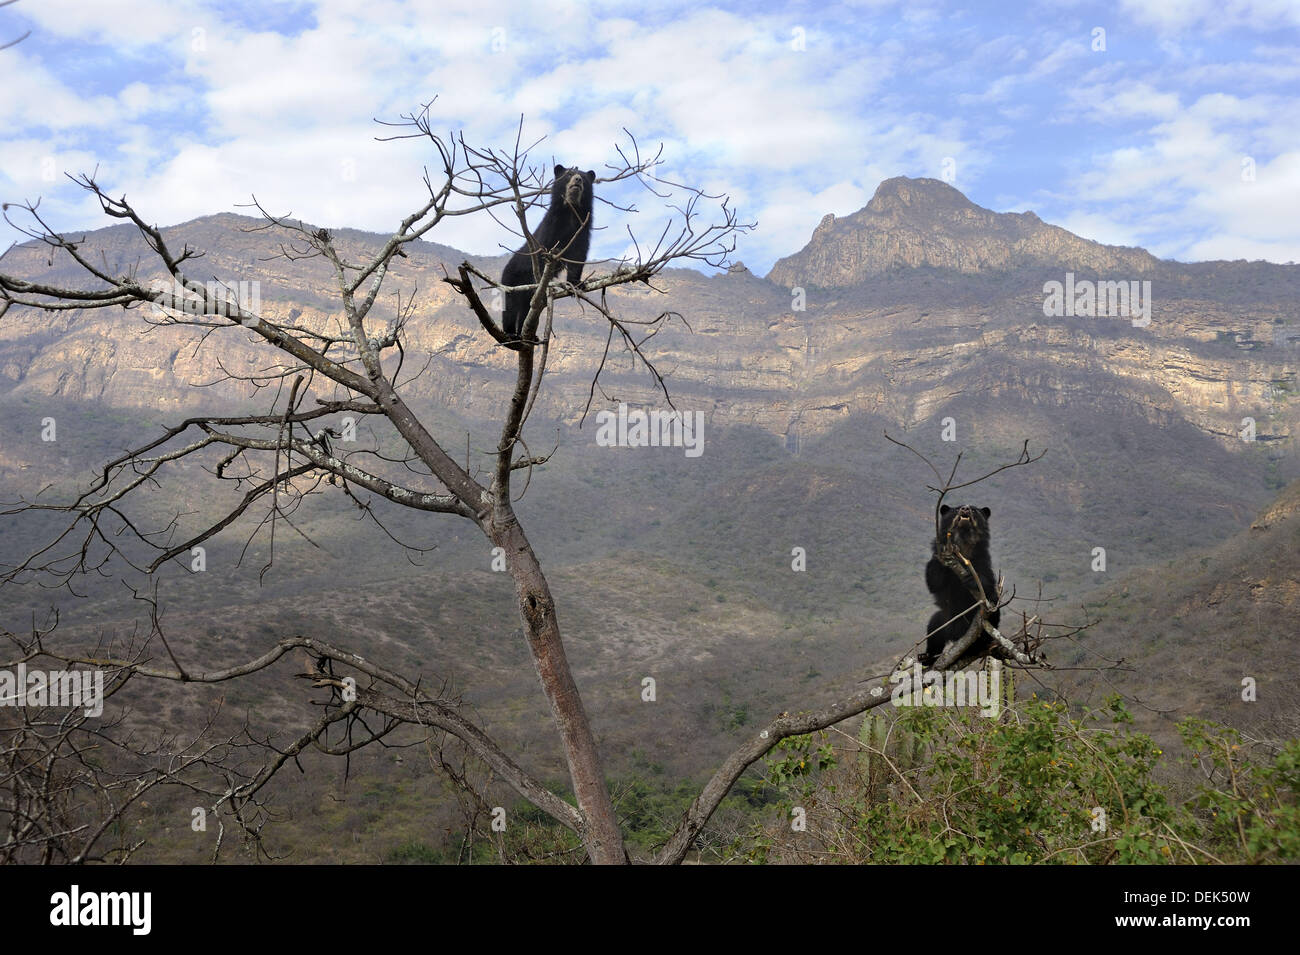 Encounter between two spectacled bears (Tremarctos ornatus) climbing in tree, Chaparri Ecological Reserve with mount Chaparri Stock Photo